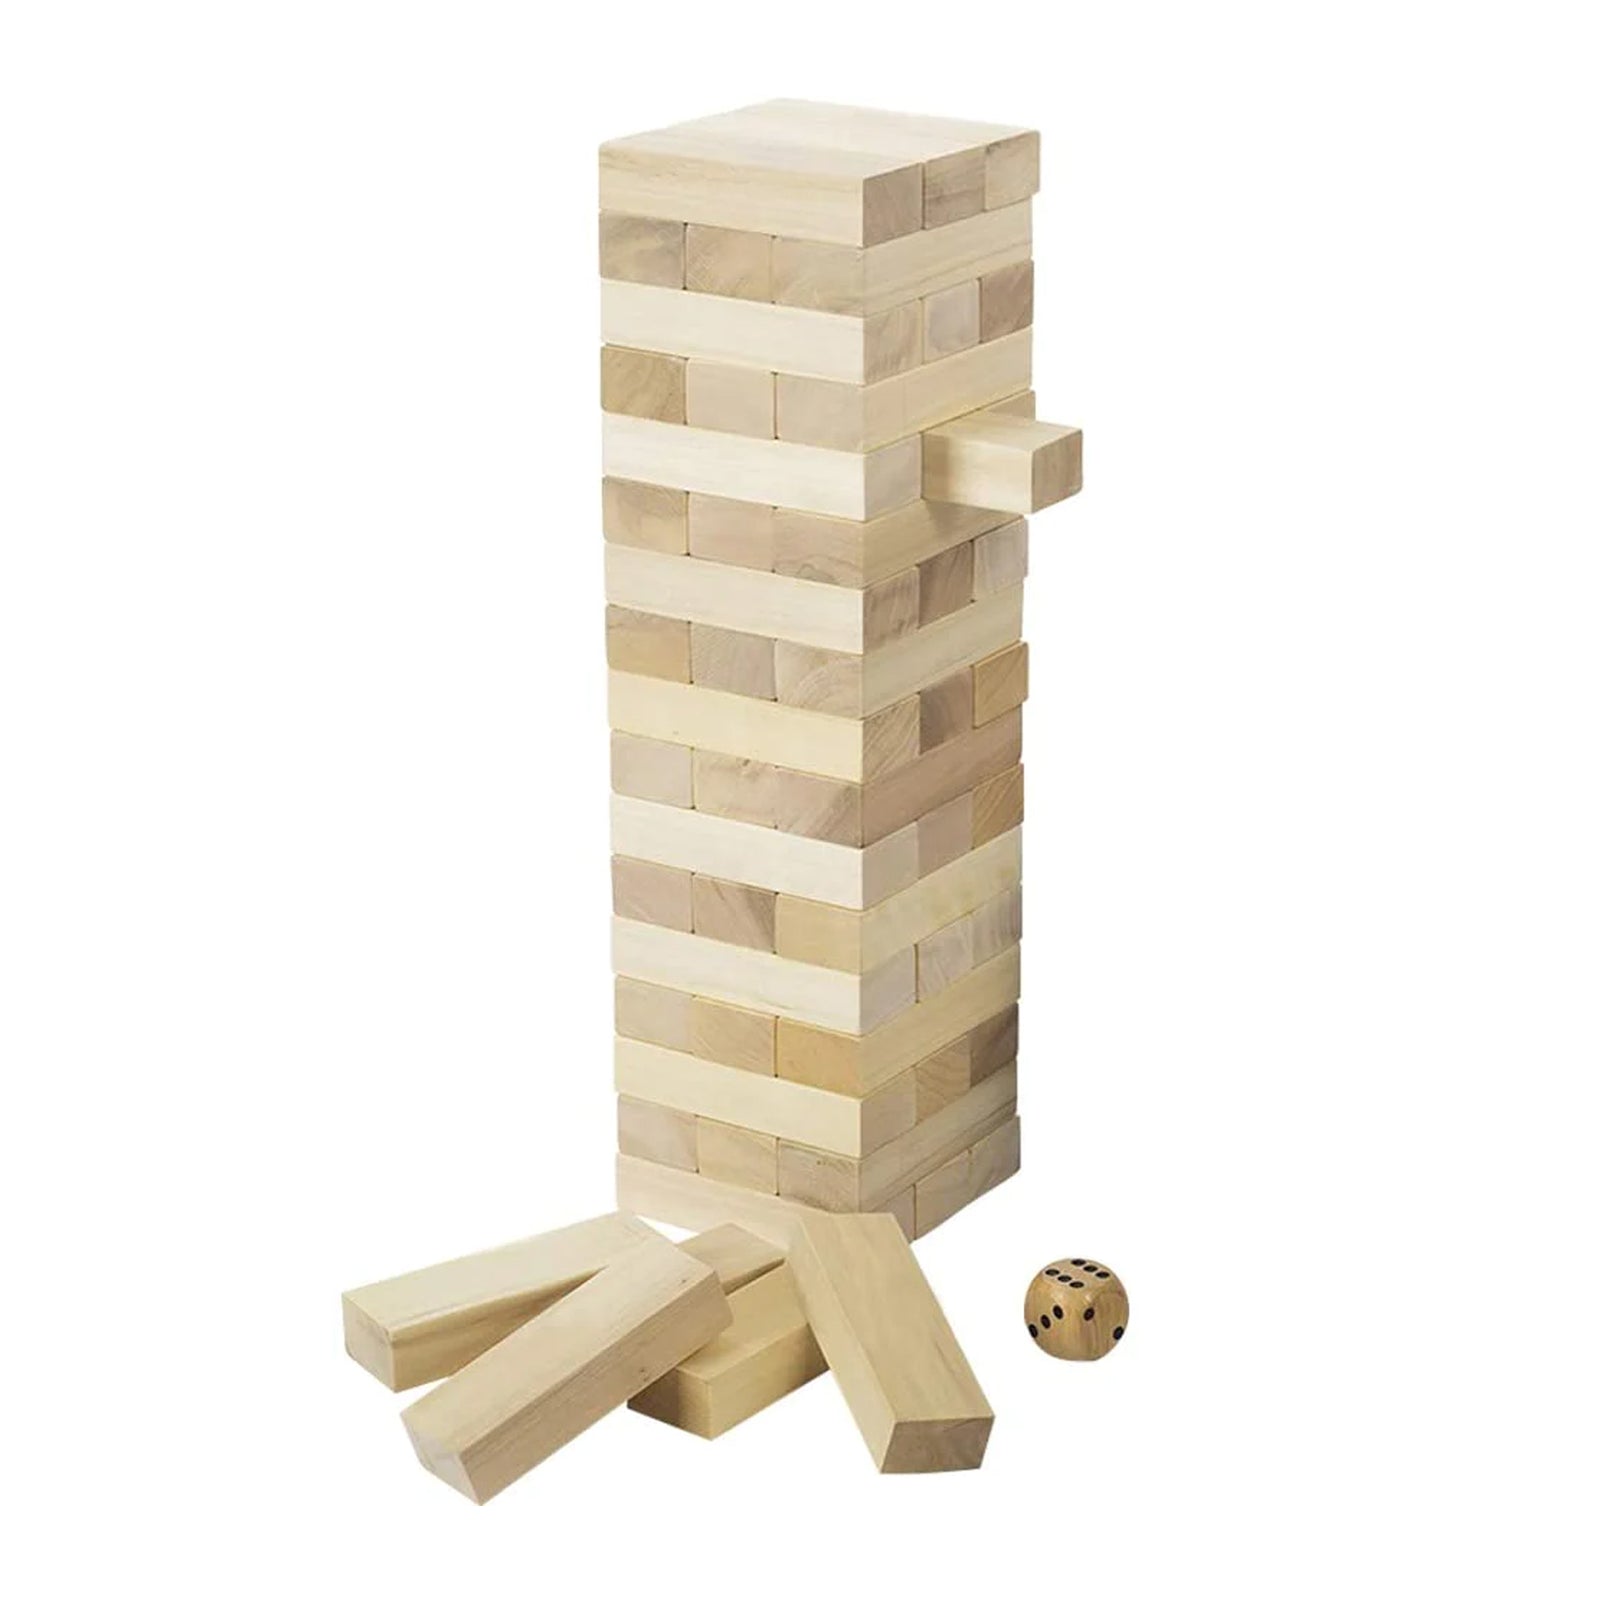 Giant Timber Tower with Dice jenga games(56 pieces)